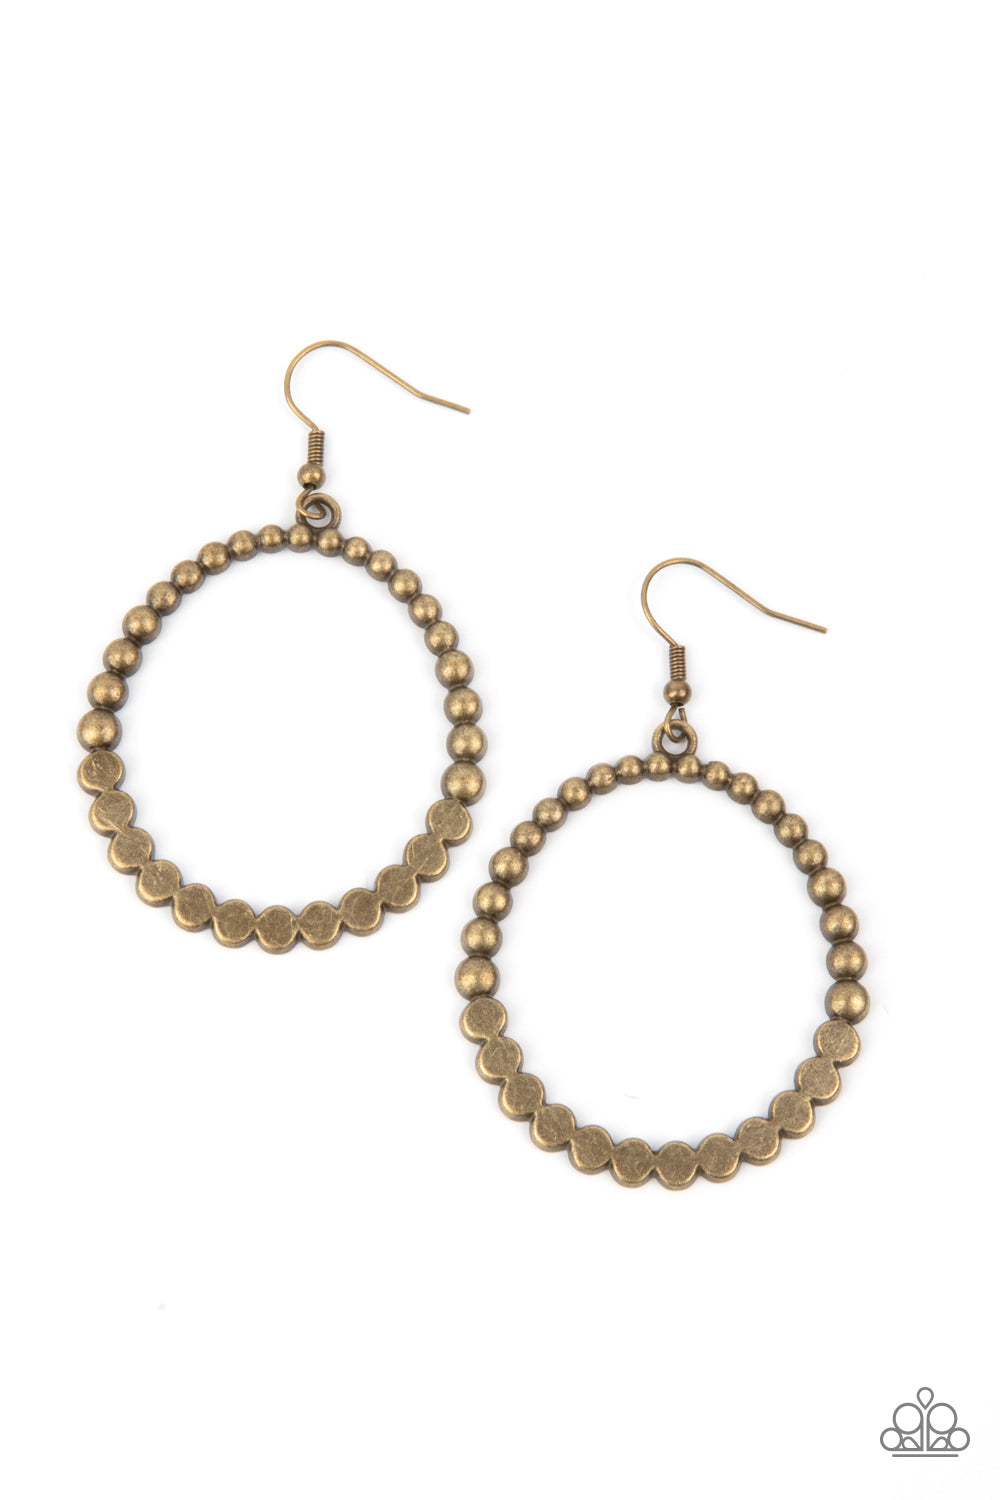 Antiqued brass studs join with flattened brass studs, creating a rustic hoop. Earring attaches to a standard fishhook fitting.  Sold as one pair of earrings.